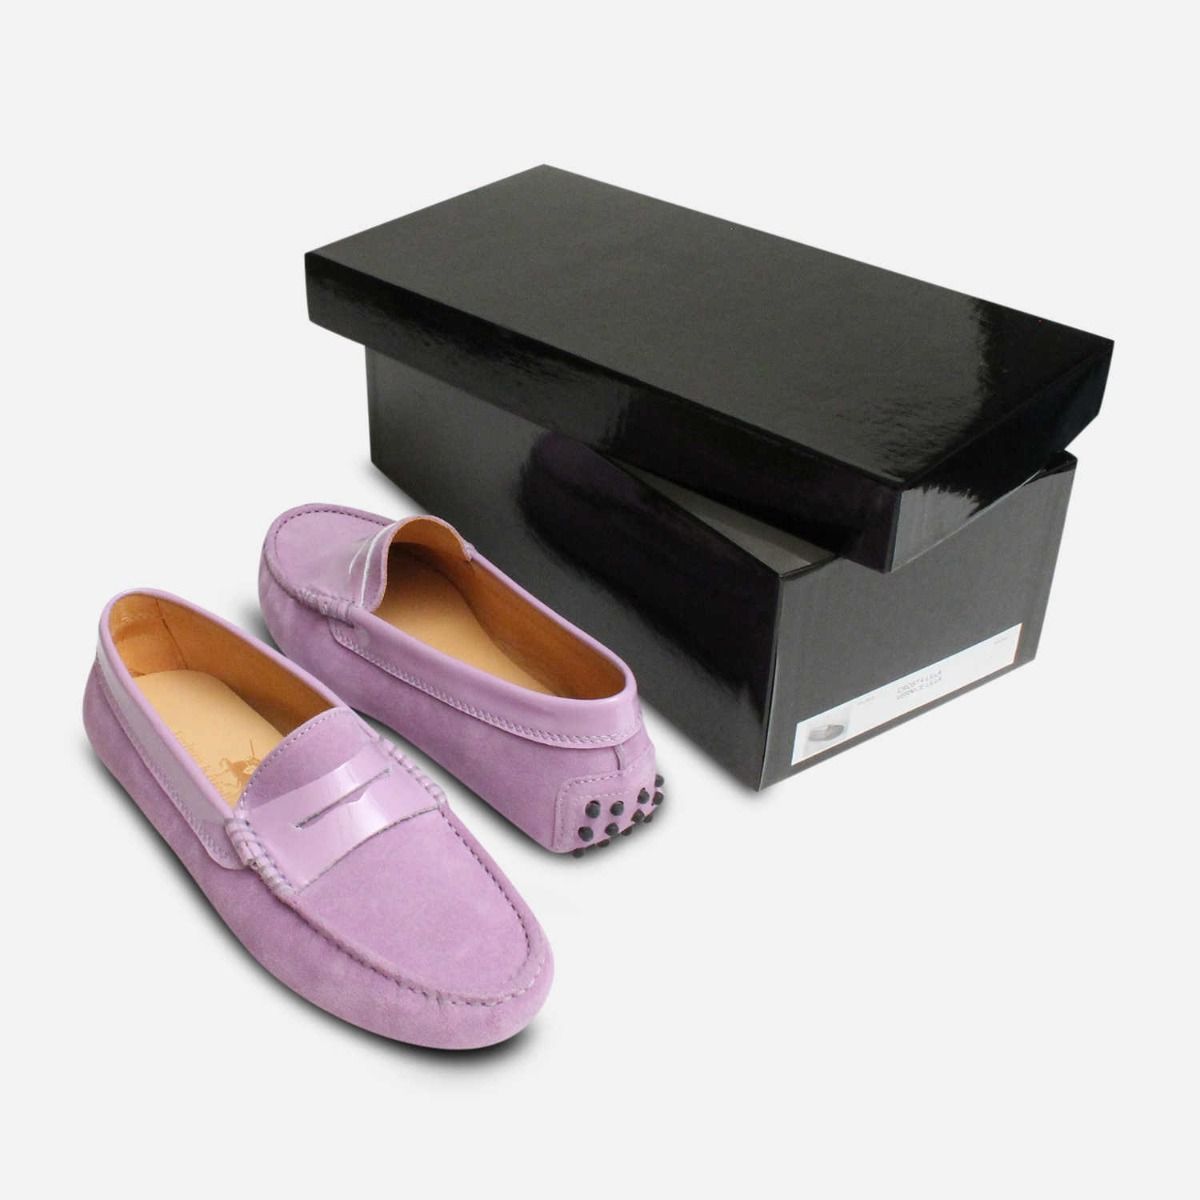 Shoes Womens Shoes Slip Ons Moccasins Woman Flat Moccasin made in Split leather in Lilac Color Mother day gift Magenta suede 